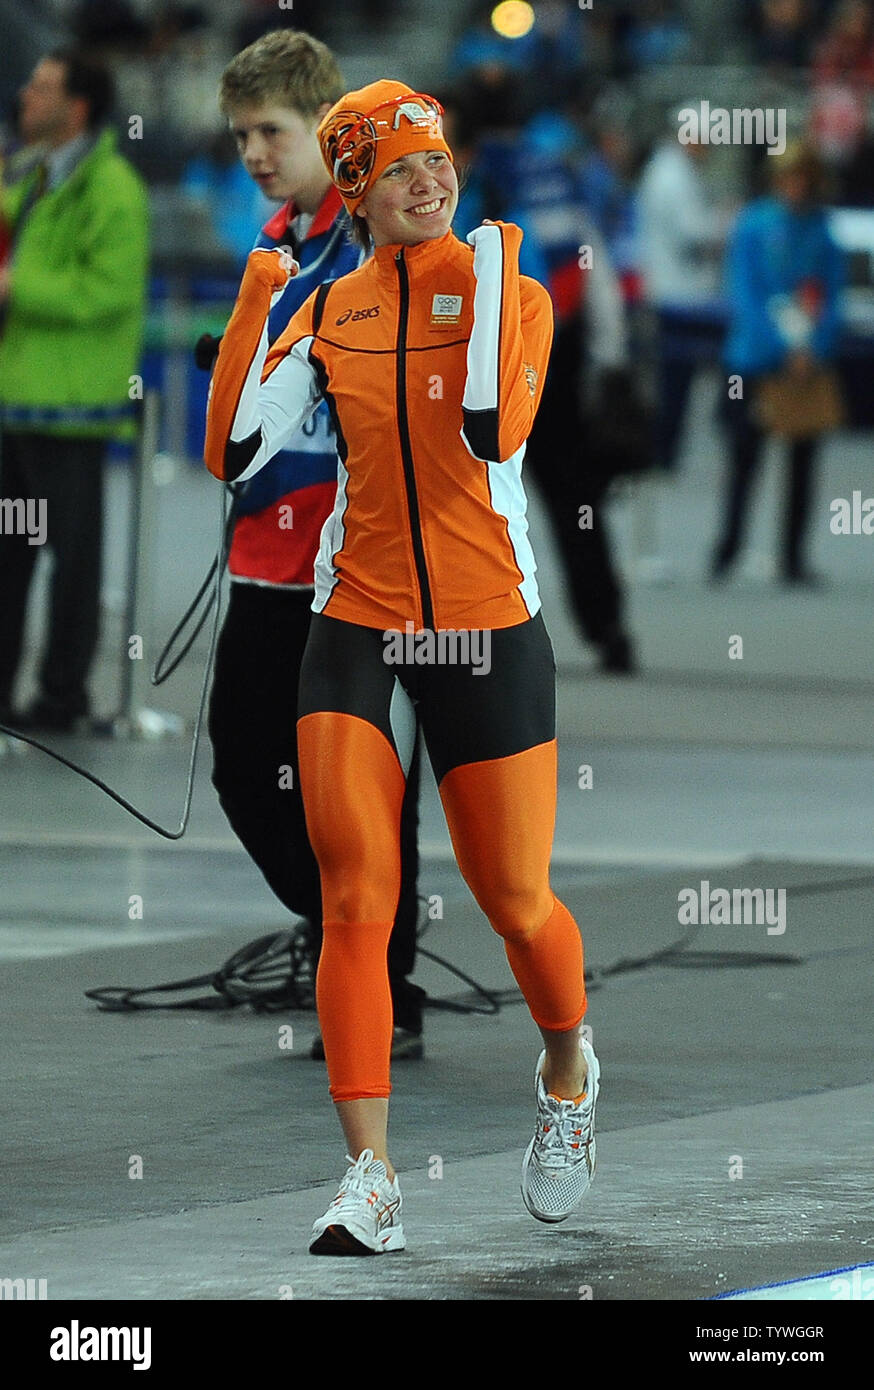 Netherlands S Laurine Van Riessen Celebrates Her Bronze Medal Performance In Women S 1000 Meter Speed Skating At The Richmond Olympic Oval In Vancouver Canada During The 2010 Winter Olympics On February 18 2010